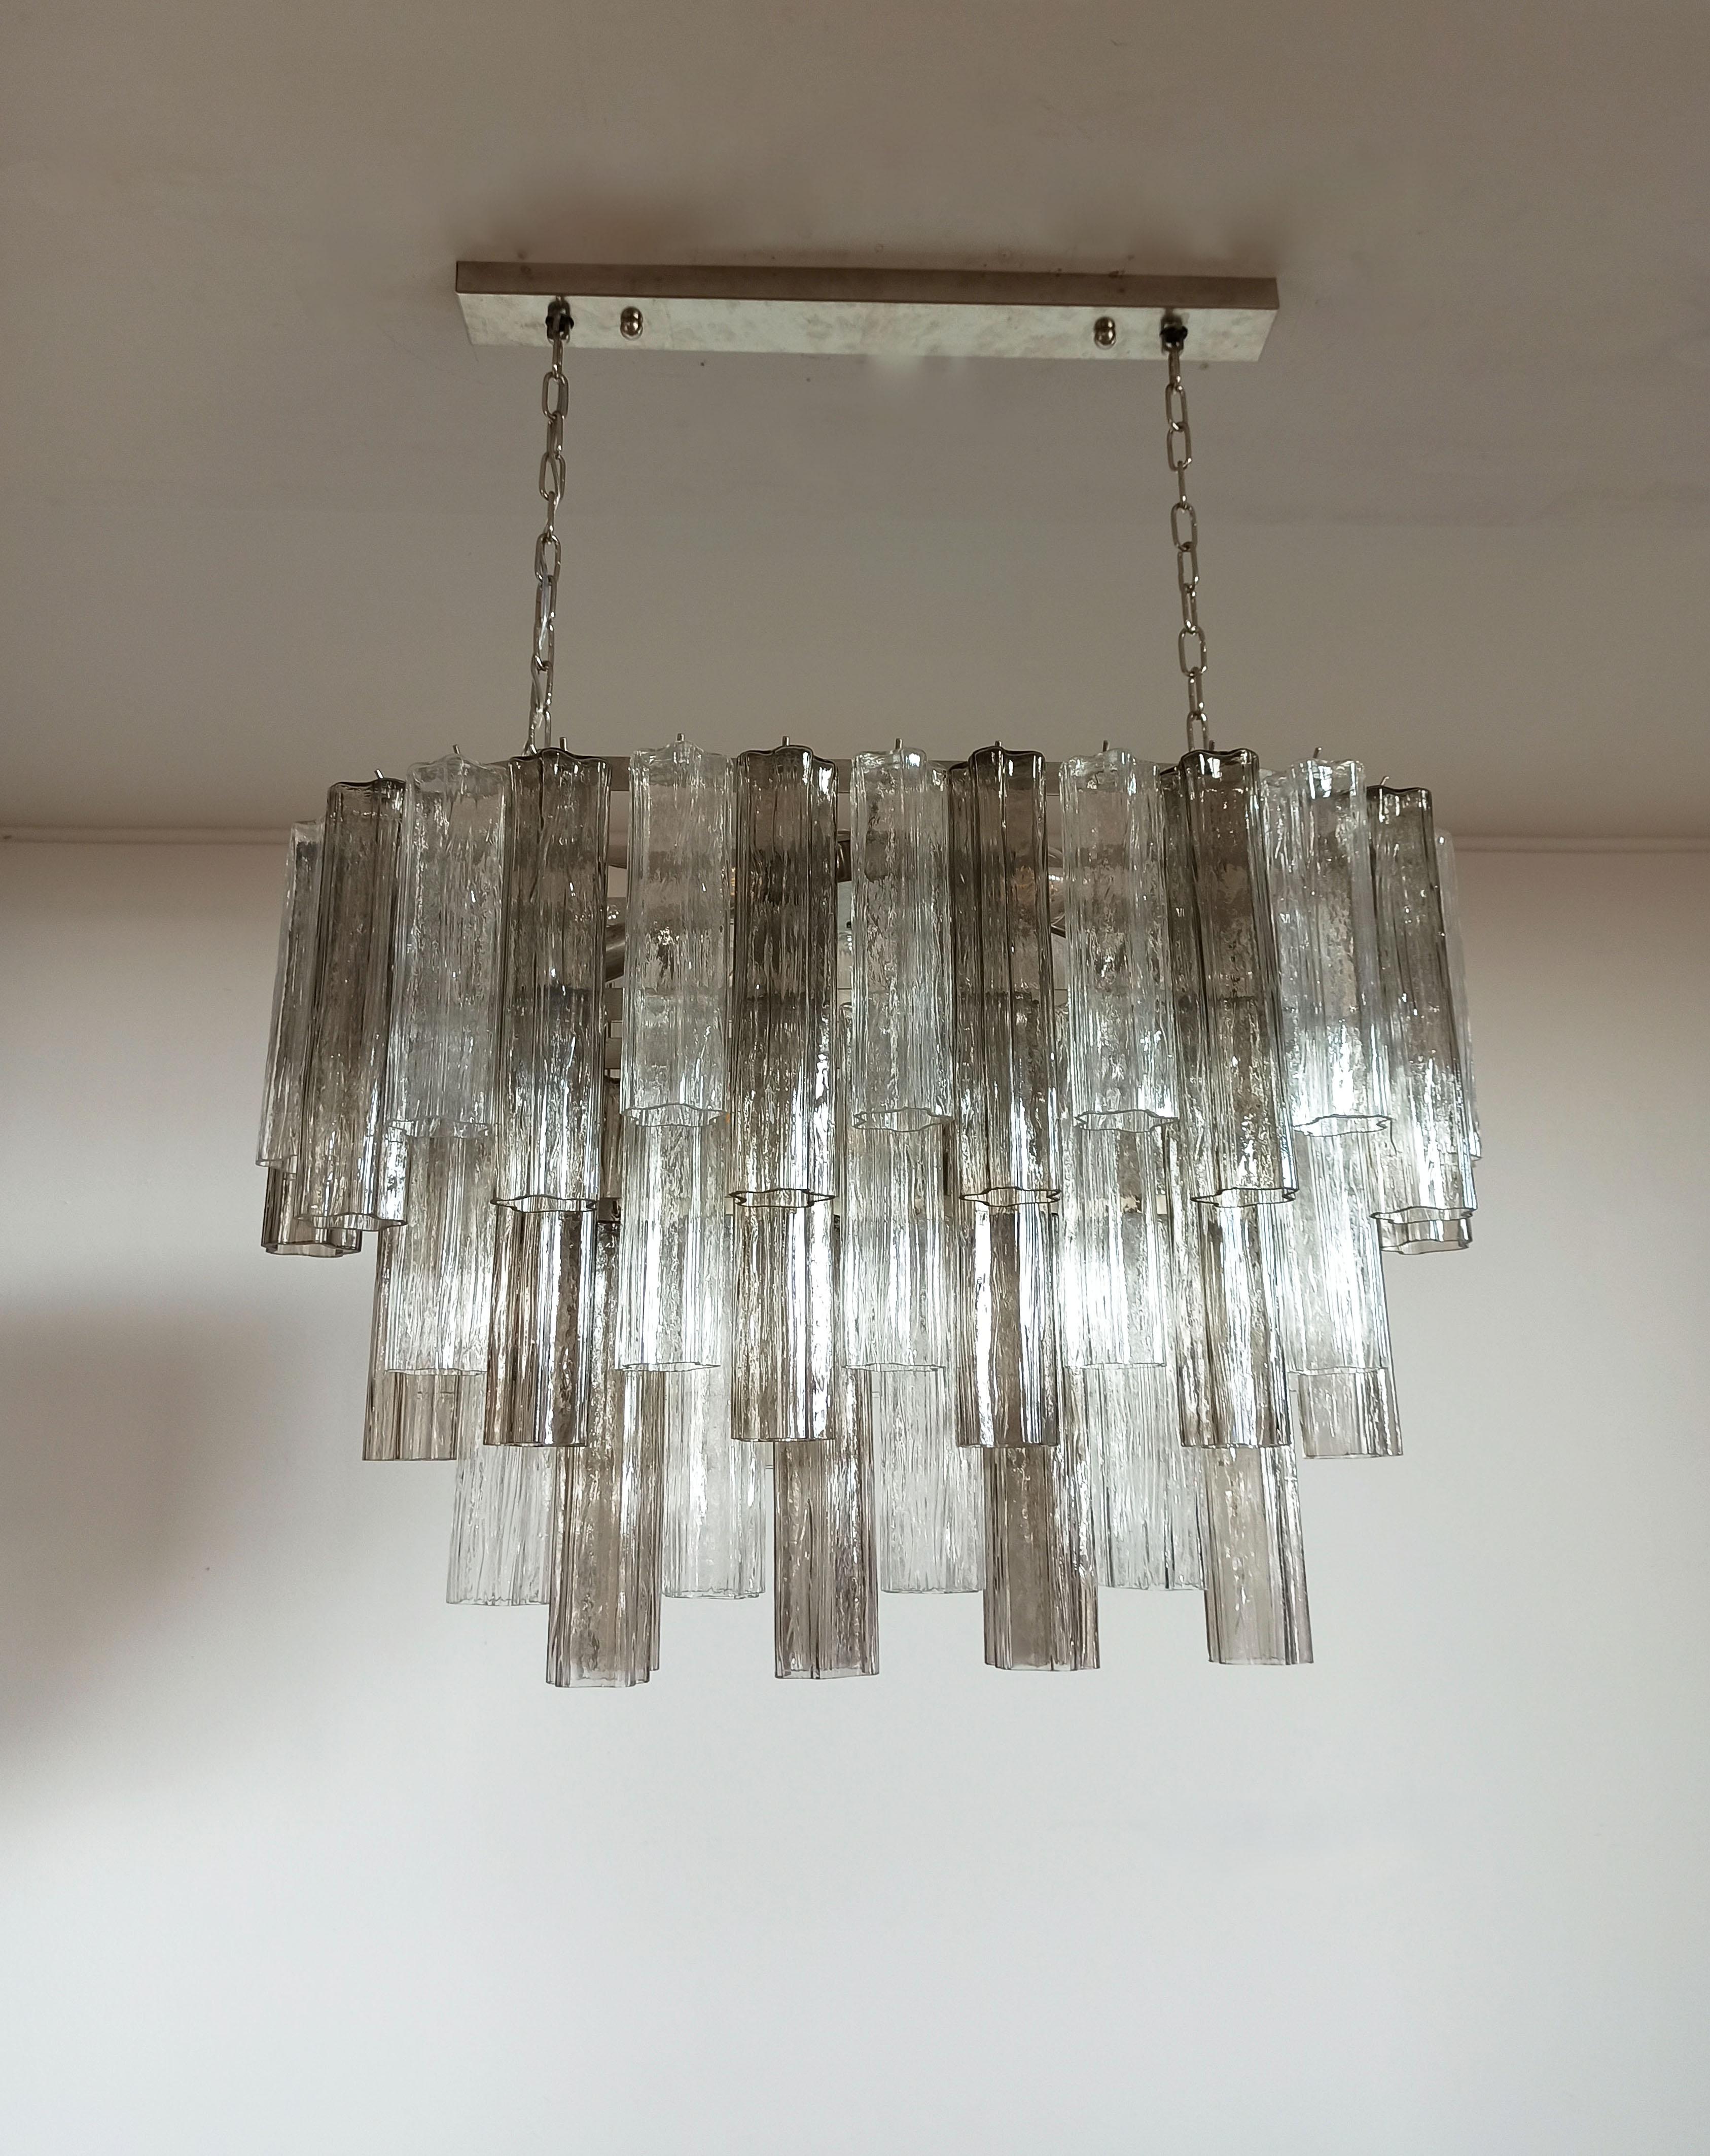 Elegant Italian chandelier made from 62 beautiful Murano transparent and smoked glass tubes. The armor polished nickel supports 62 large shaded multicolored glass tubes in a star shape, which makes the chandelier a true work of art.
Period: